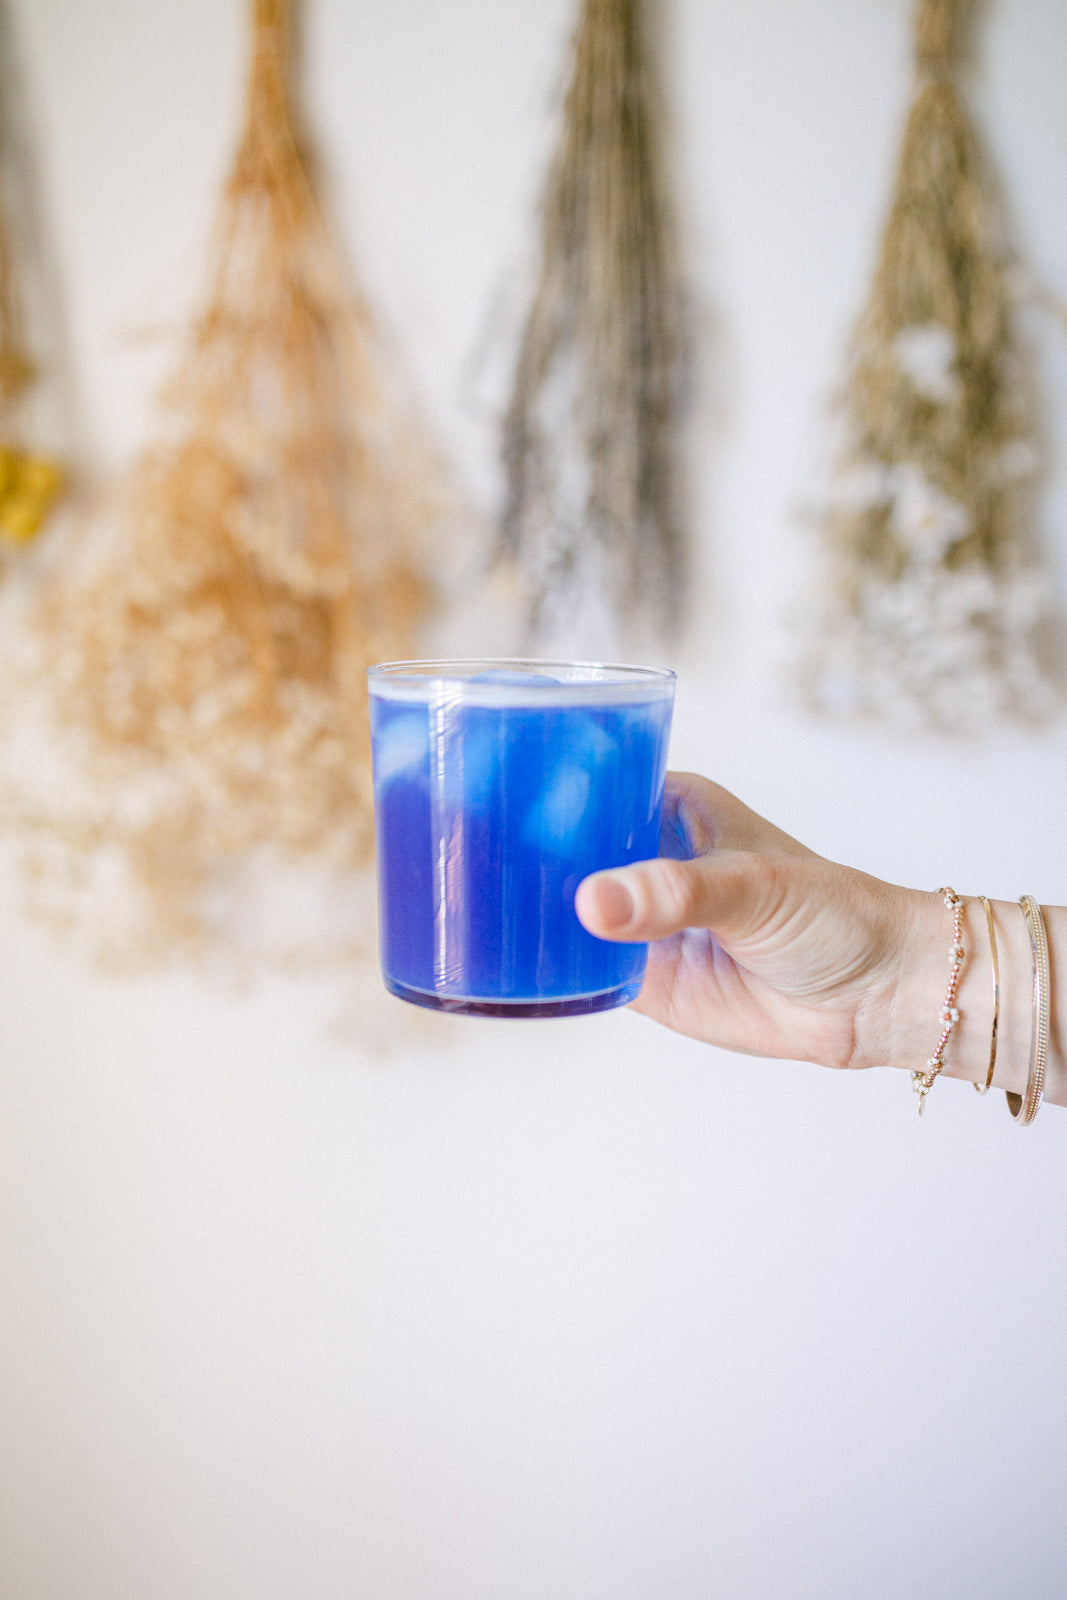 image of a hand honding a cup with the magic magnesium prepared - a vivid blue liquid